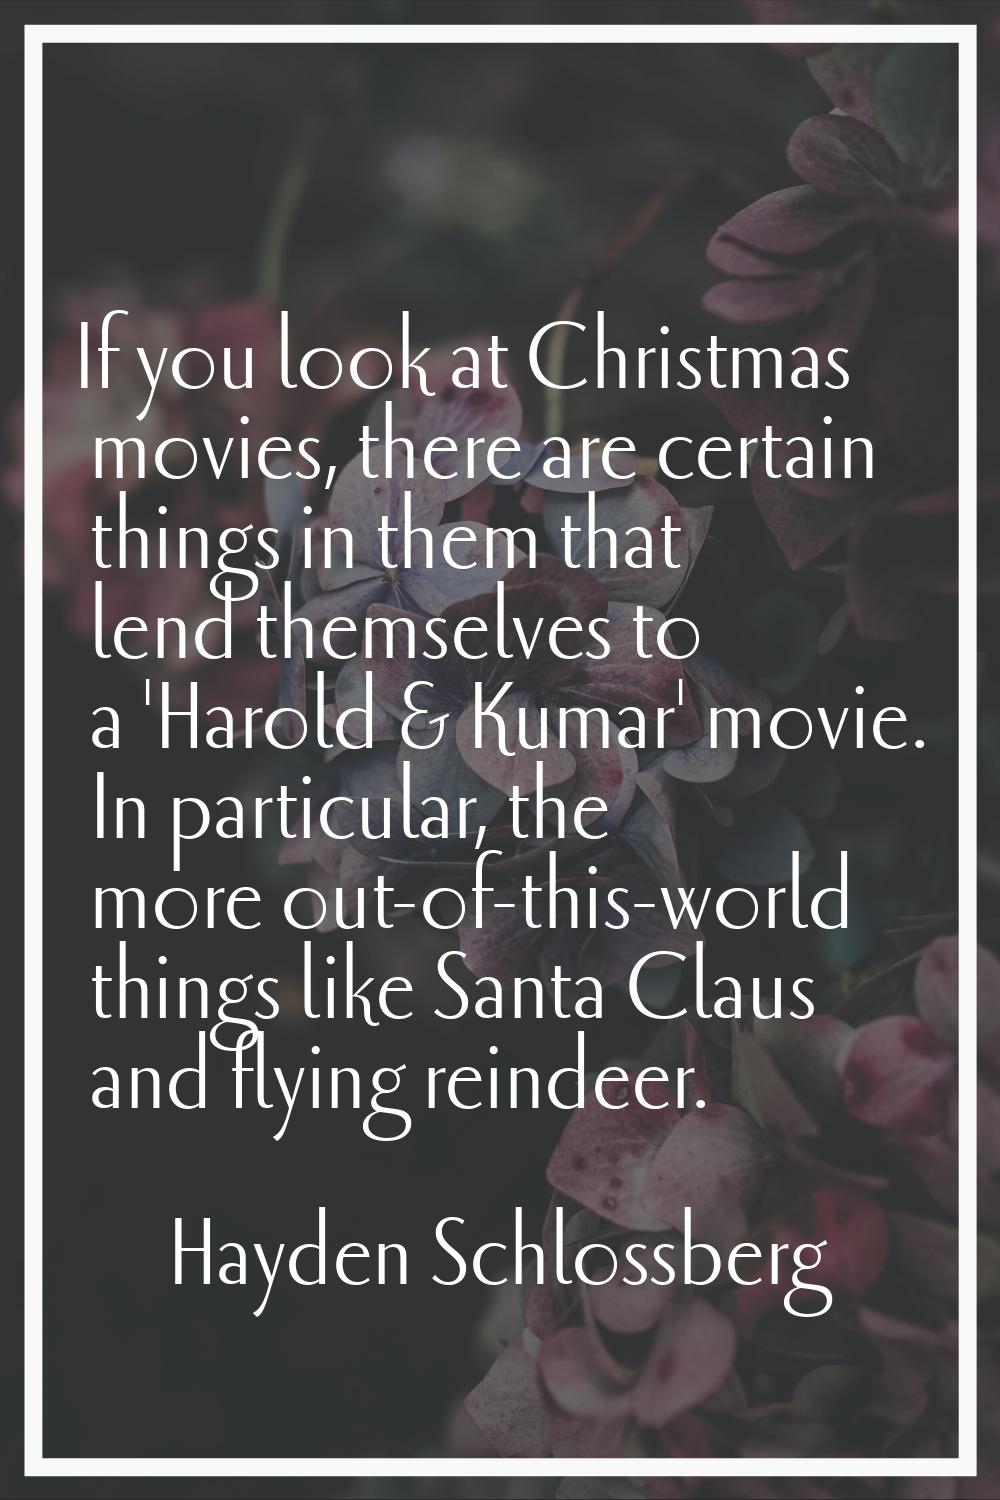 If you look at Christmas movies, there are certain things in them that lend themselves to a 'Harold